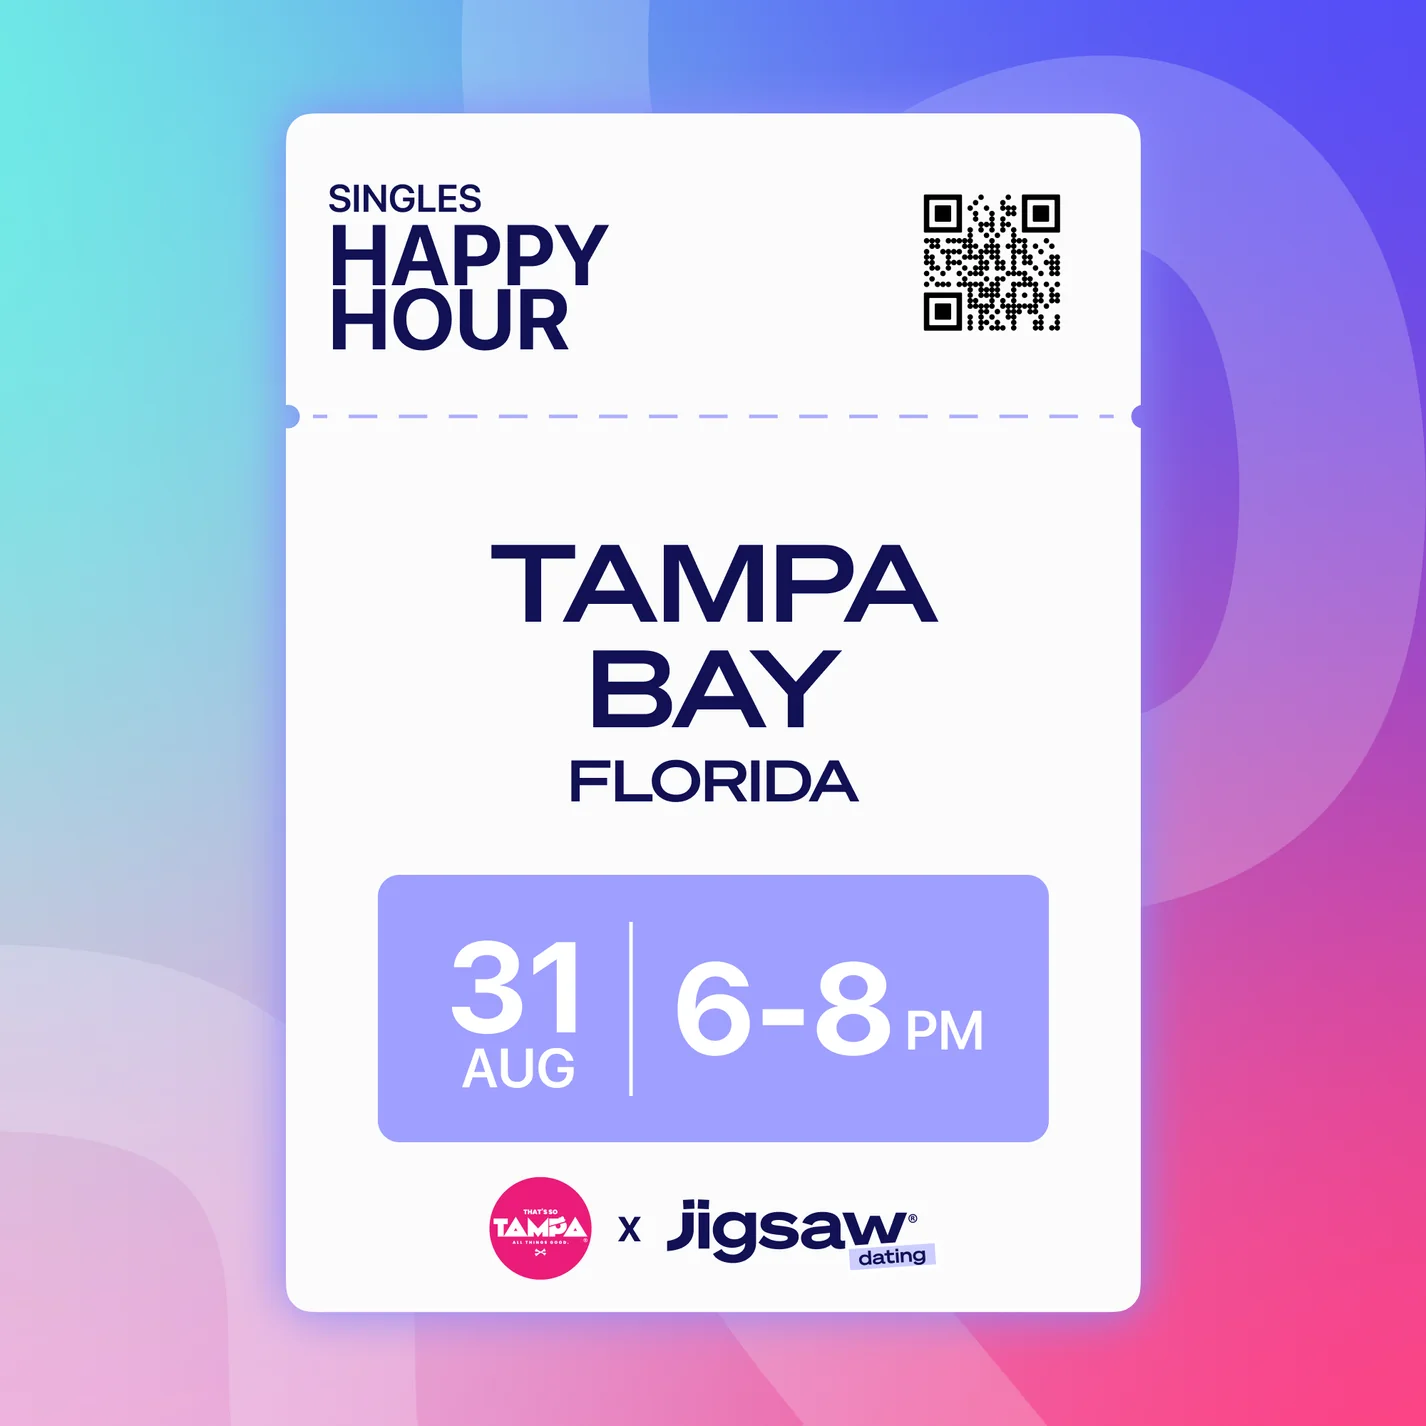 TAMPA BAY: Singles Happy Hour